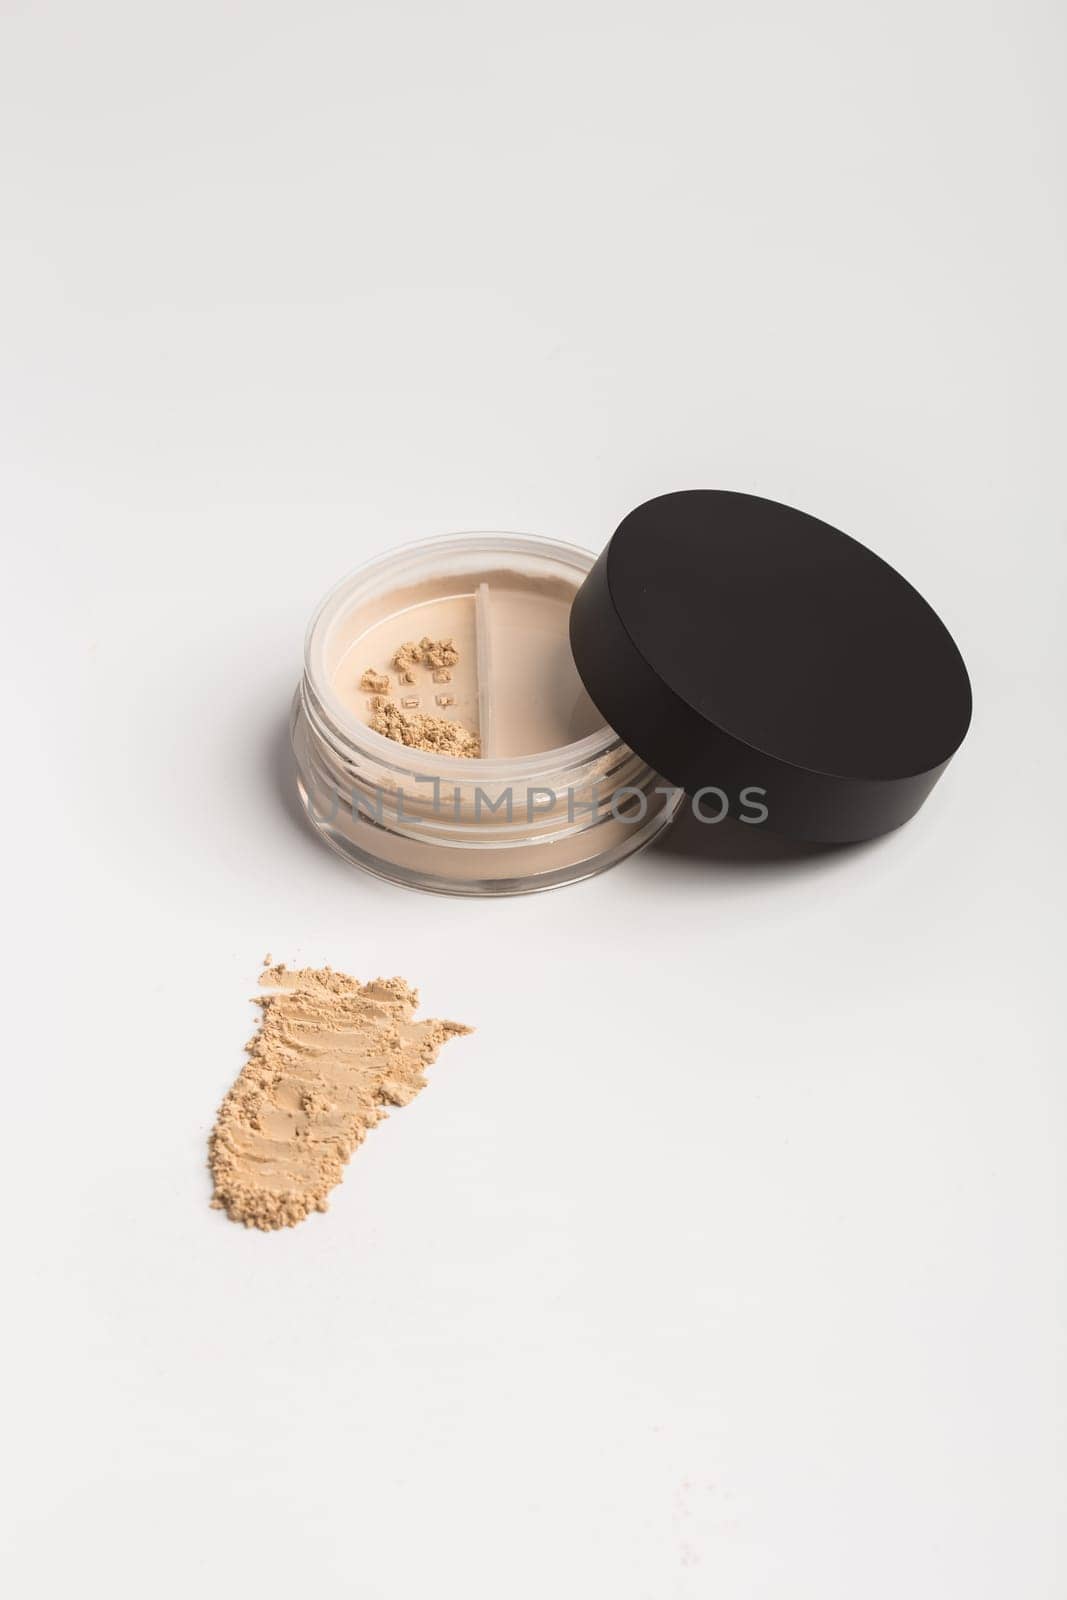 Mineral makeup powder twist seal sifter isolated on white background. Light beige foundation powder. Skin tone face cosmetic product sample by Satura86